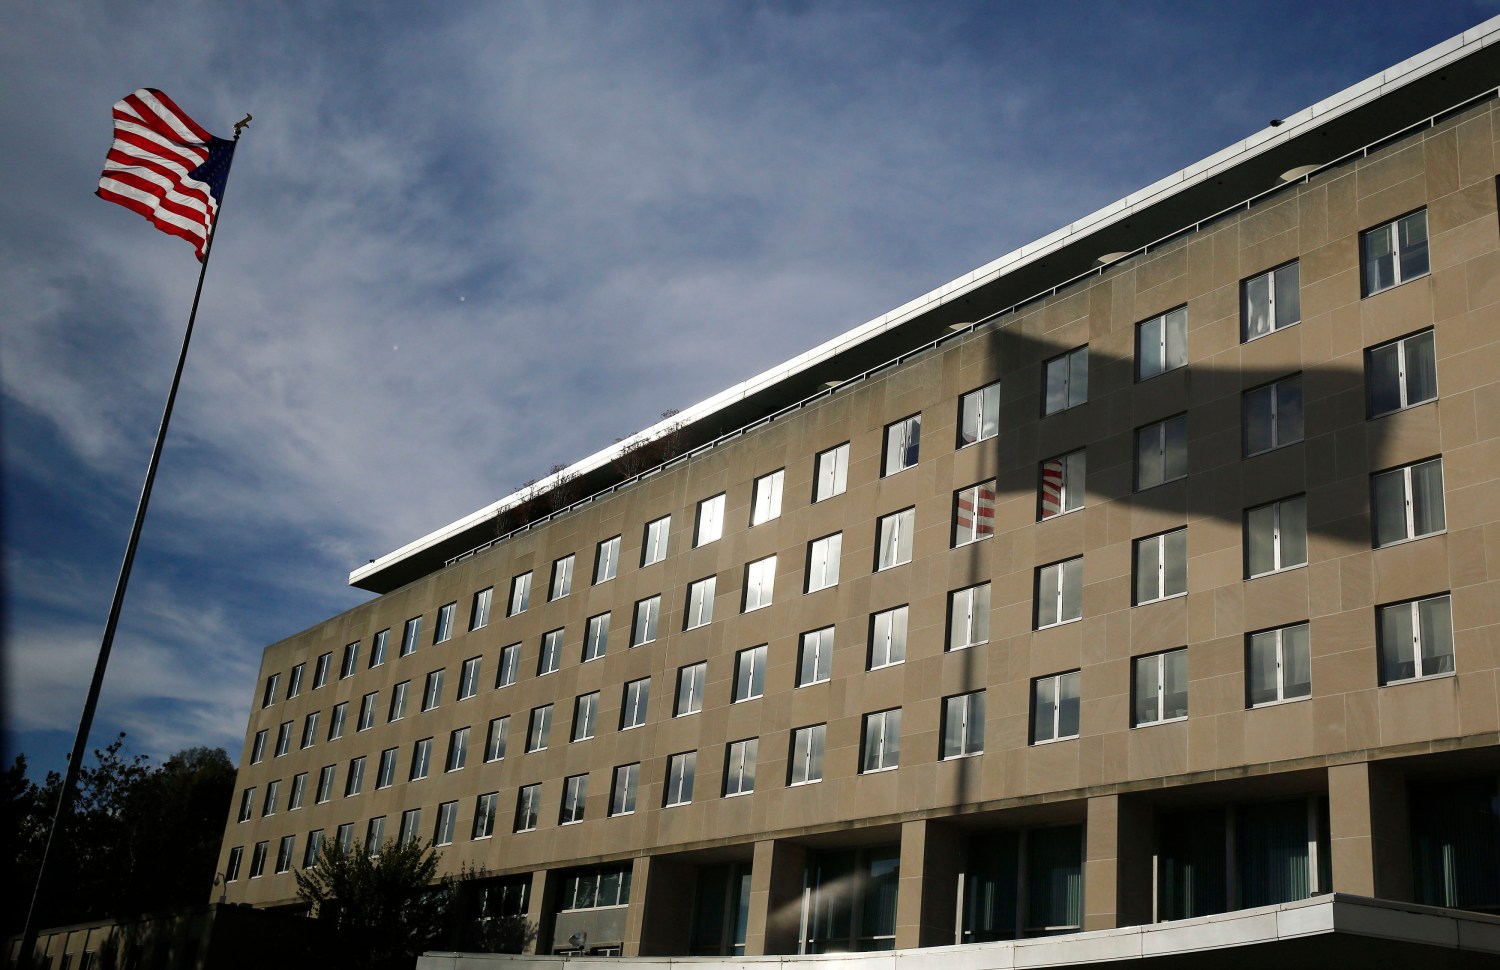 A U.S. national flag and its shadow falling on the Harry S. Truman Building at the Department of State are seen in Washington, October 24, 2014.      REUTERS/Larry Downing   (UNITED STATES - Tags: POLITICS SOCIETY) - GM1EAAP0DNZ01